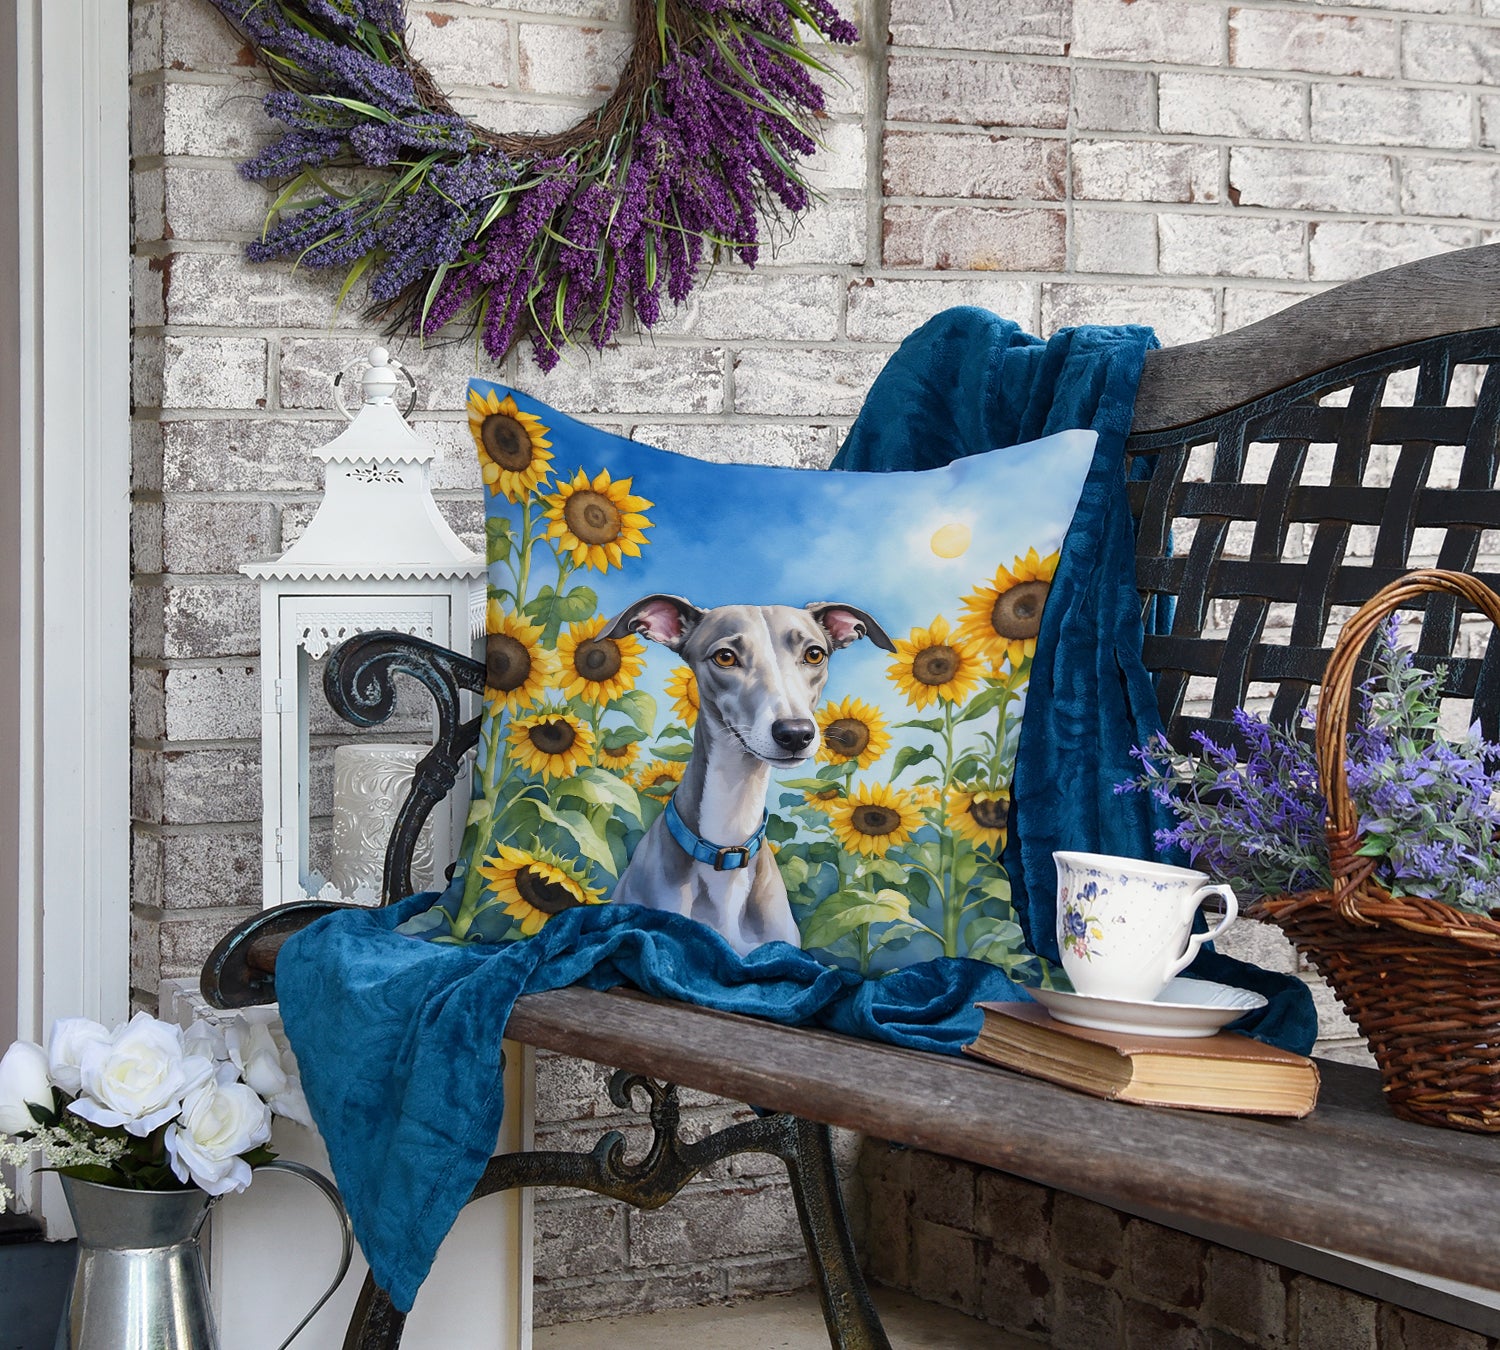 Whippet in Sunflowers Throw Pillow